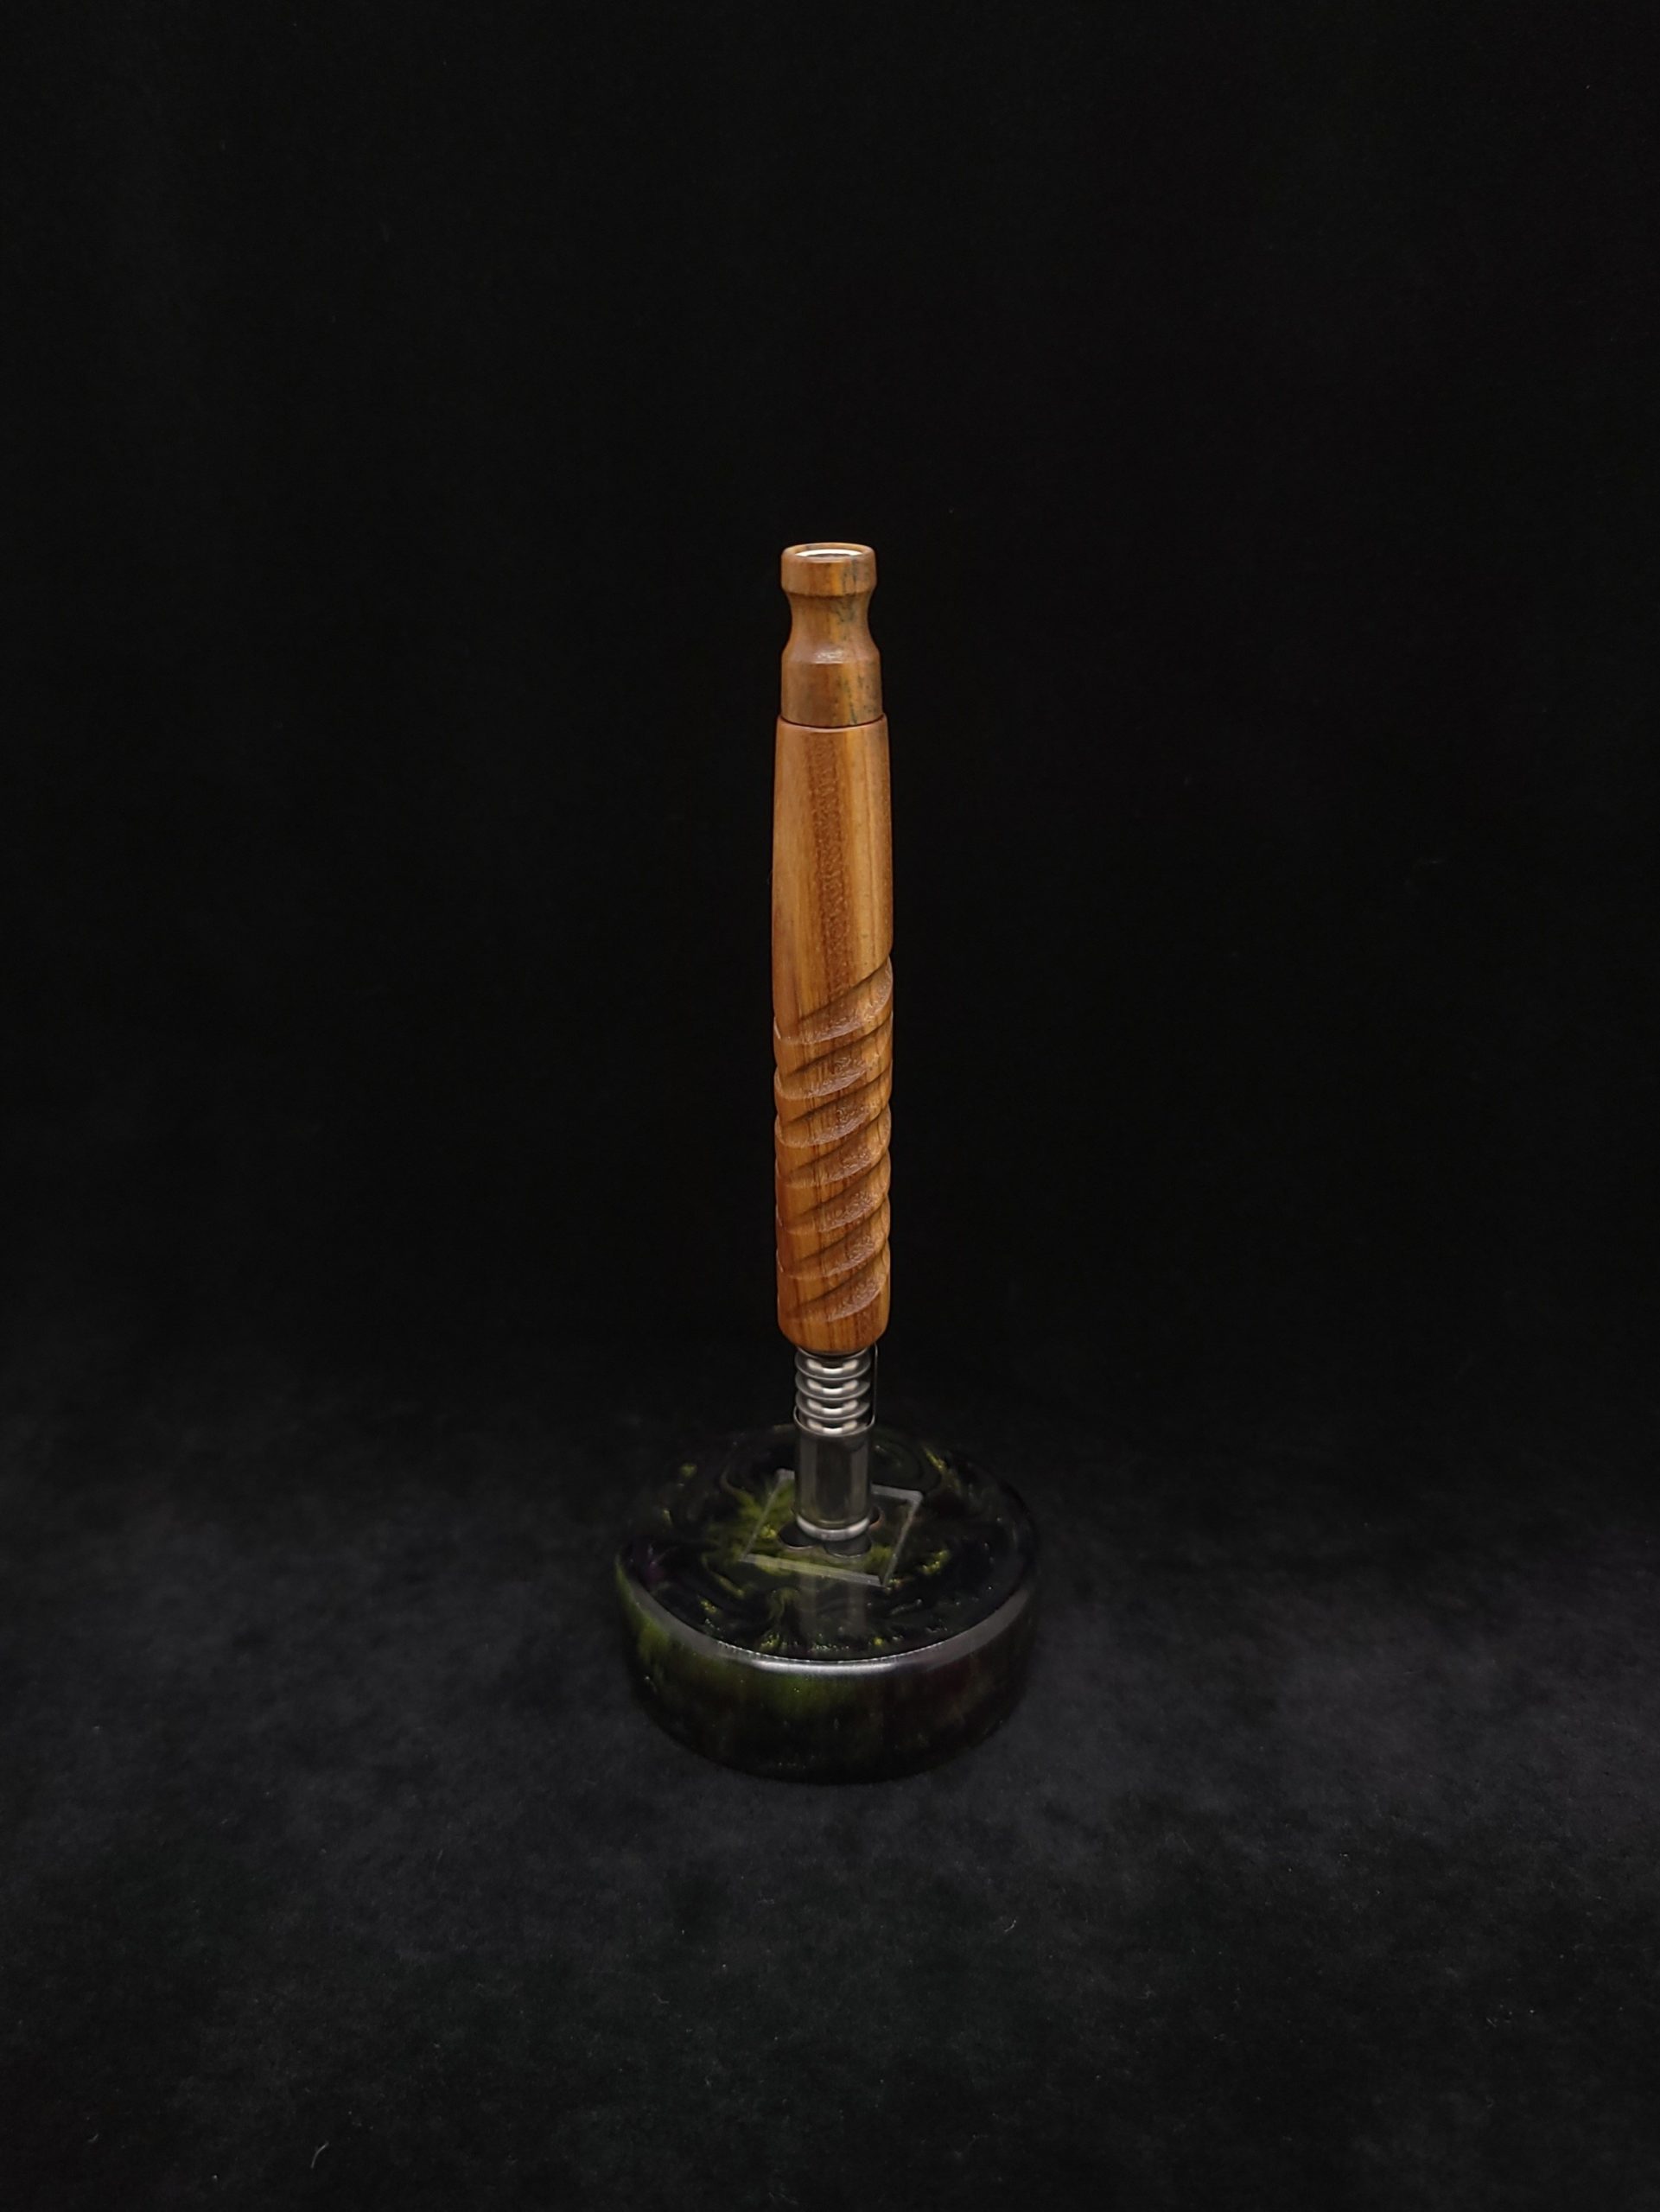 This image portrays Twisted Stems Series-Eclipse XL Dynavap Stem/Lignum Vitae w/Matching Mouthpiece by Dovetail Woodwork.